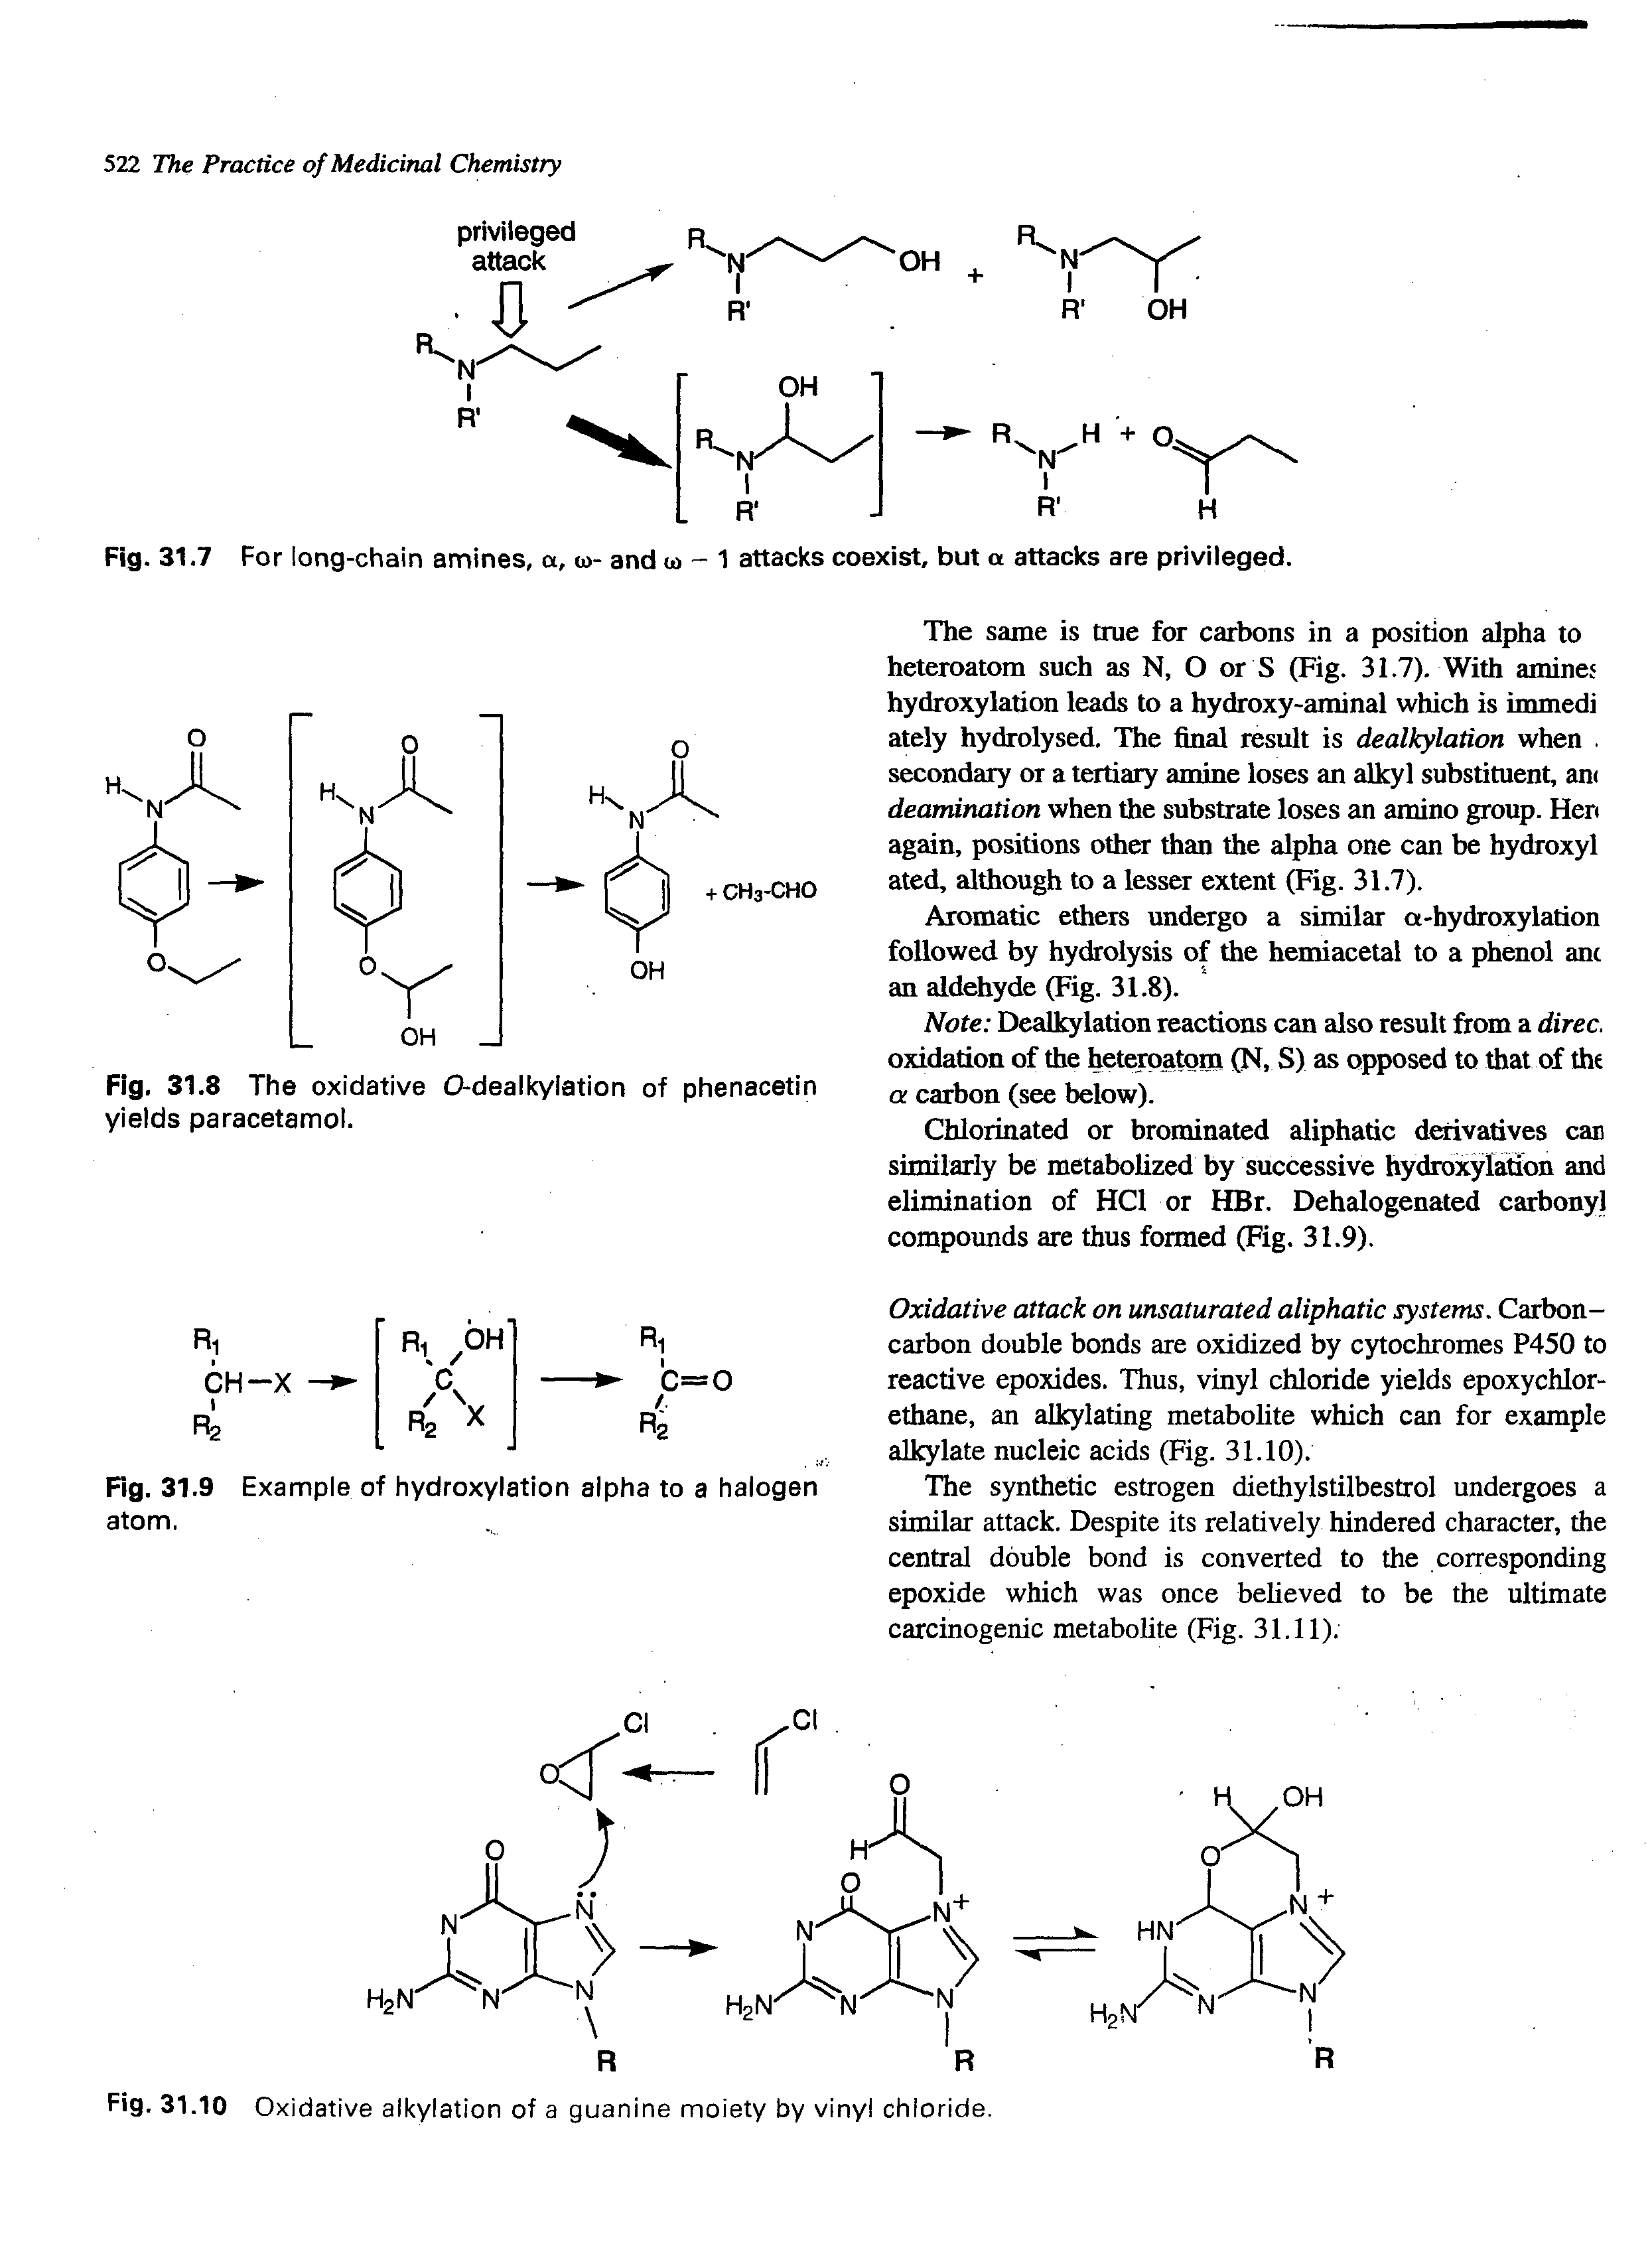 Fig. 31.10 Oxidative alkylation of a guanine moiety by vinyl chloride.